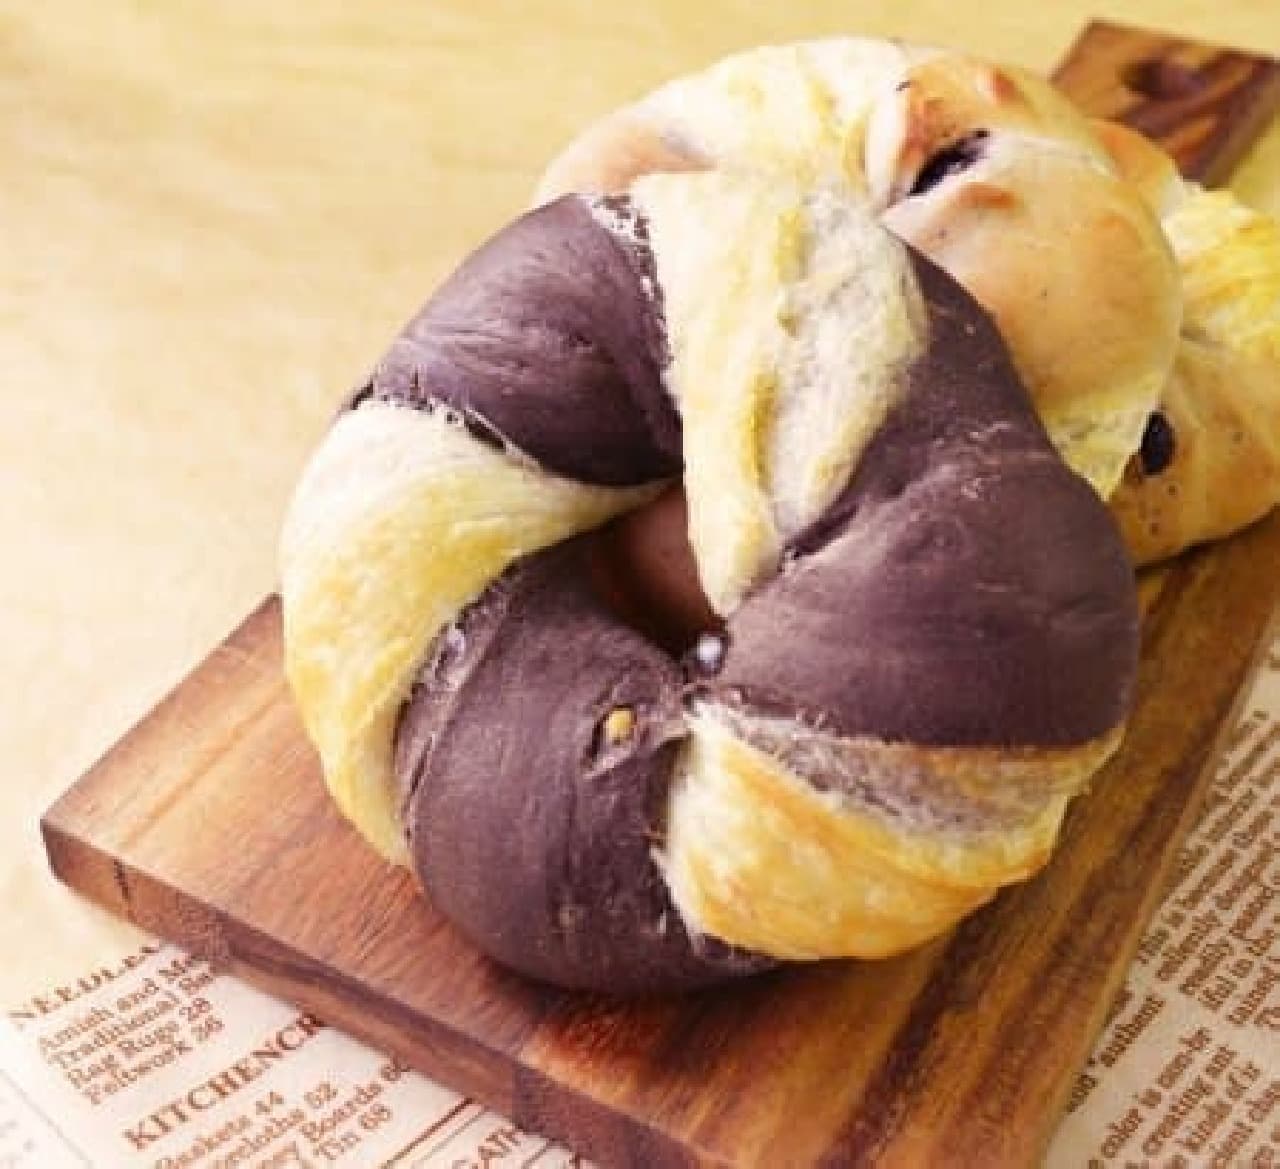 A new flavor for the crispy "croissant bagel"!